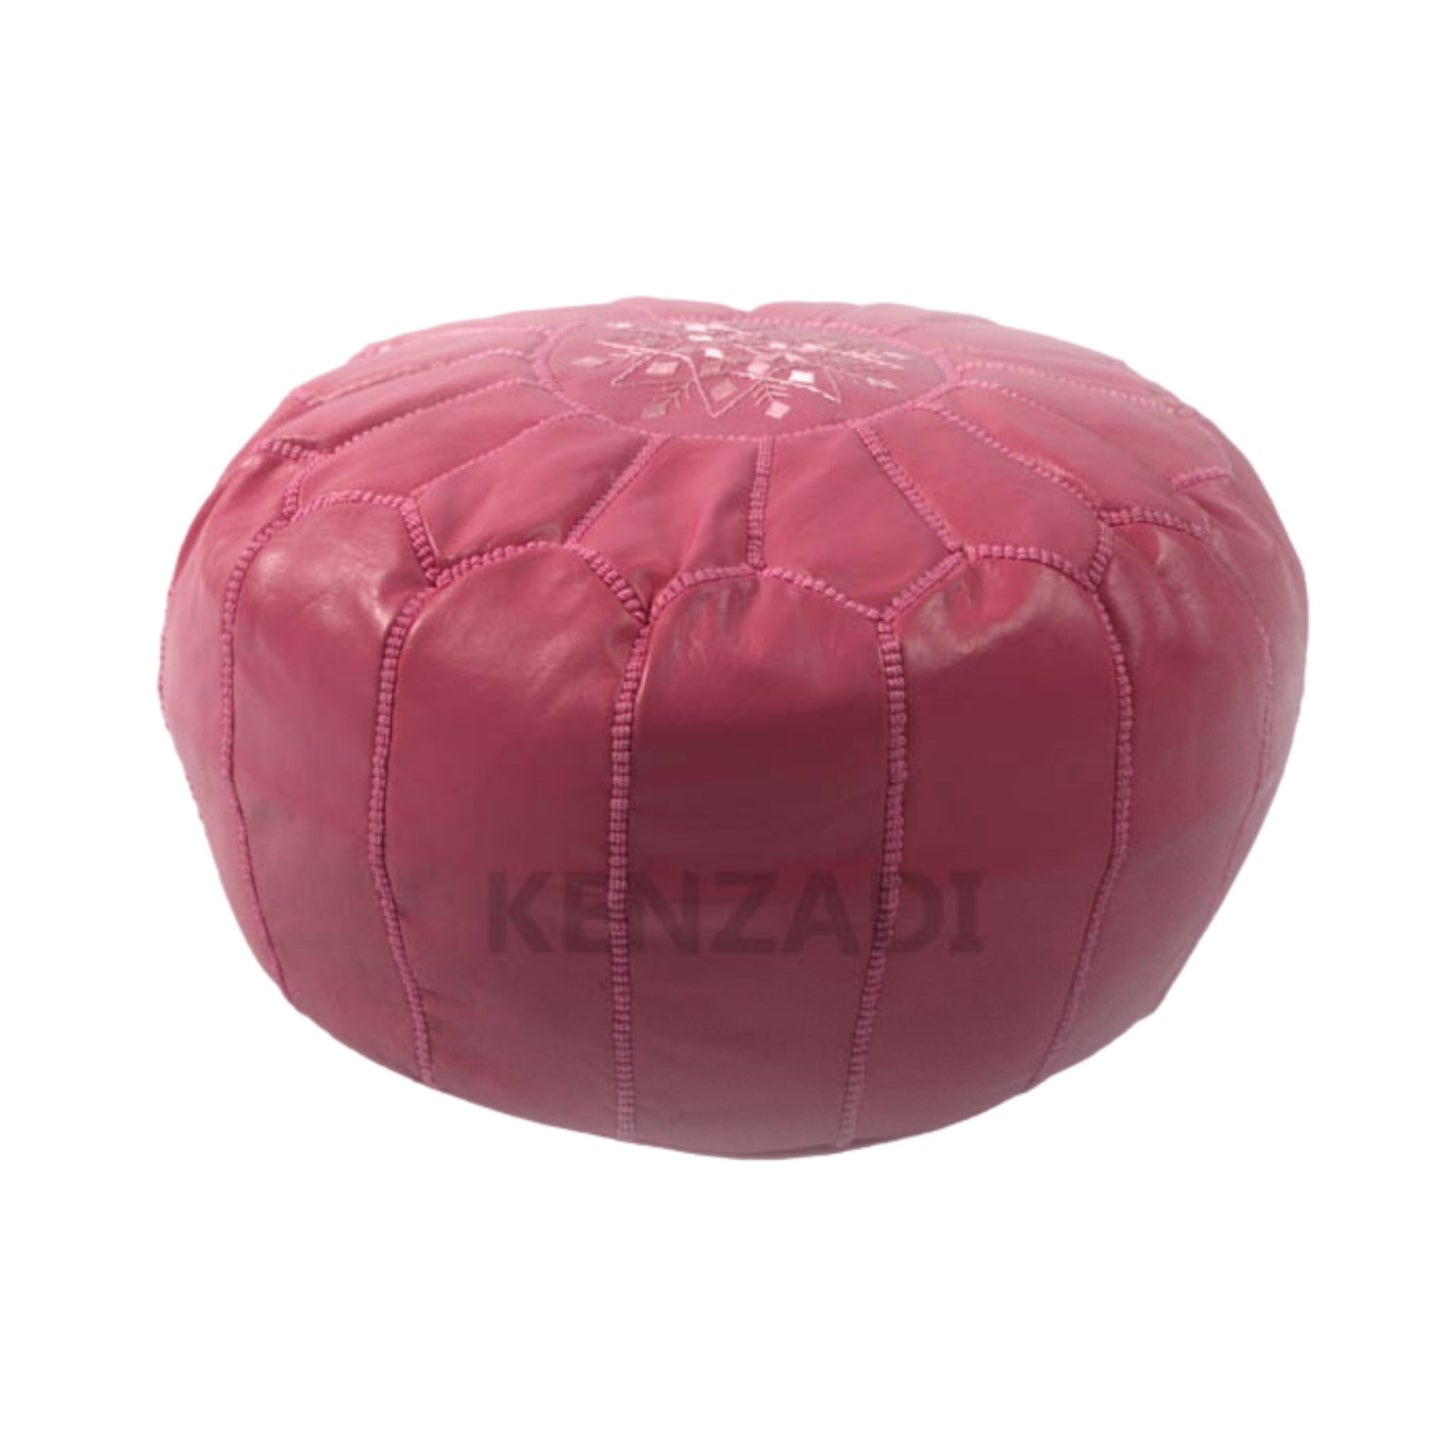 Moroccan leather pouf, round pouf, berber pouf, Pink with Pink embroidery by Kenzadi - Handmade by My Poufs